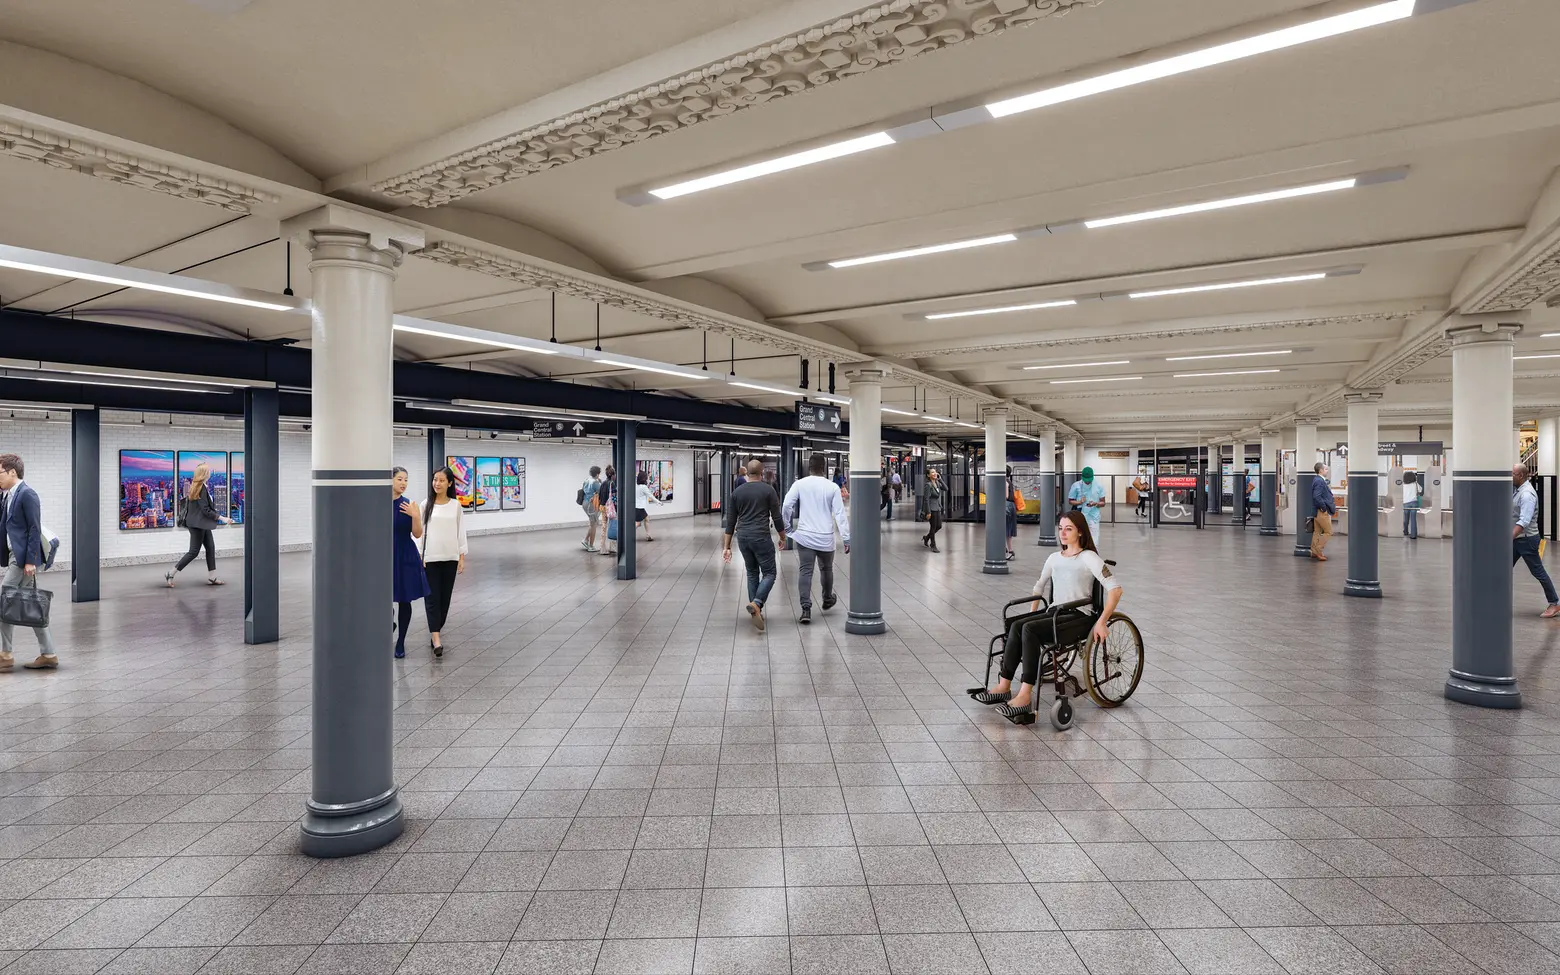 42nd Street Connection Project, MTA, transportation, 42nd street shuttle, accessibility, grand central terminal